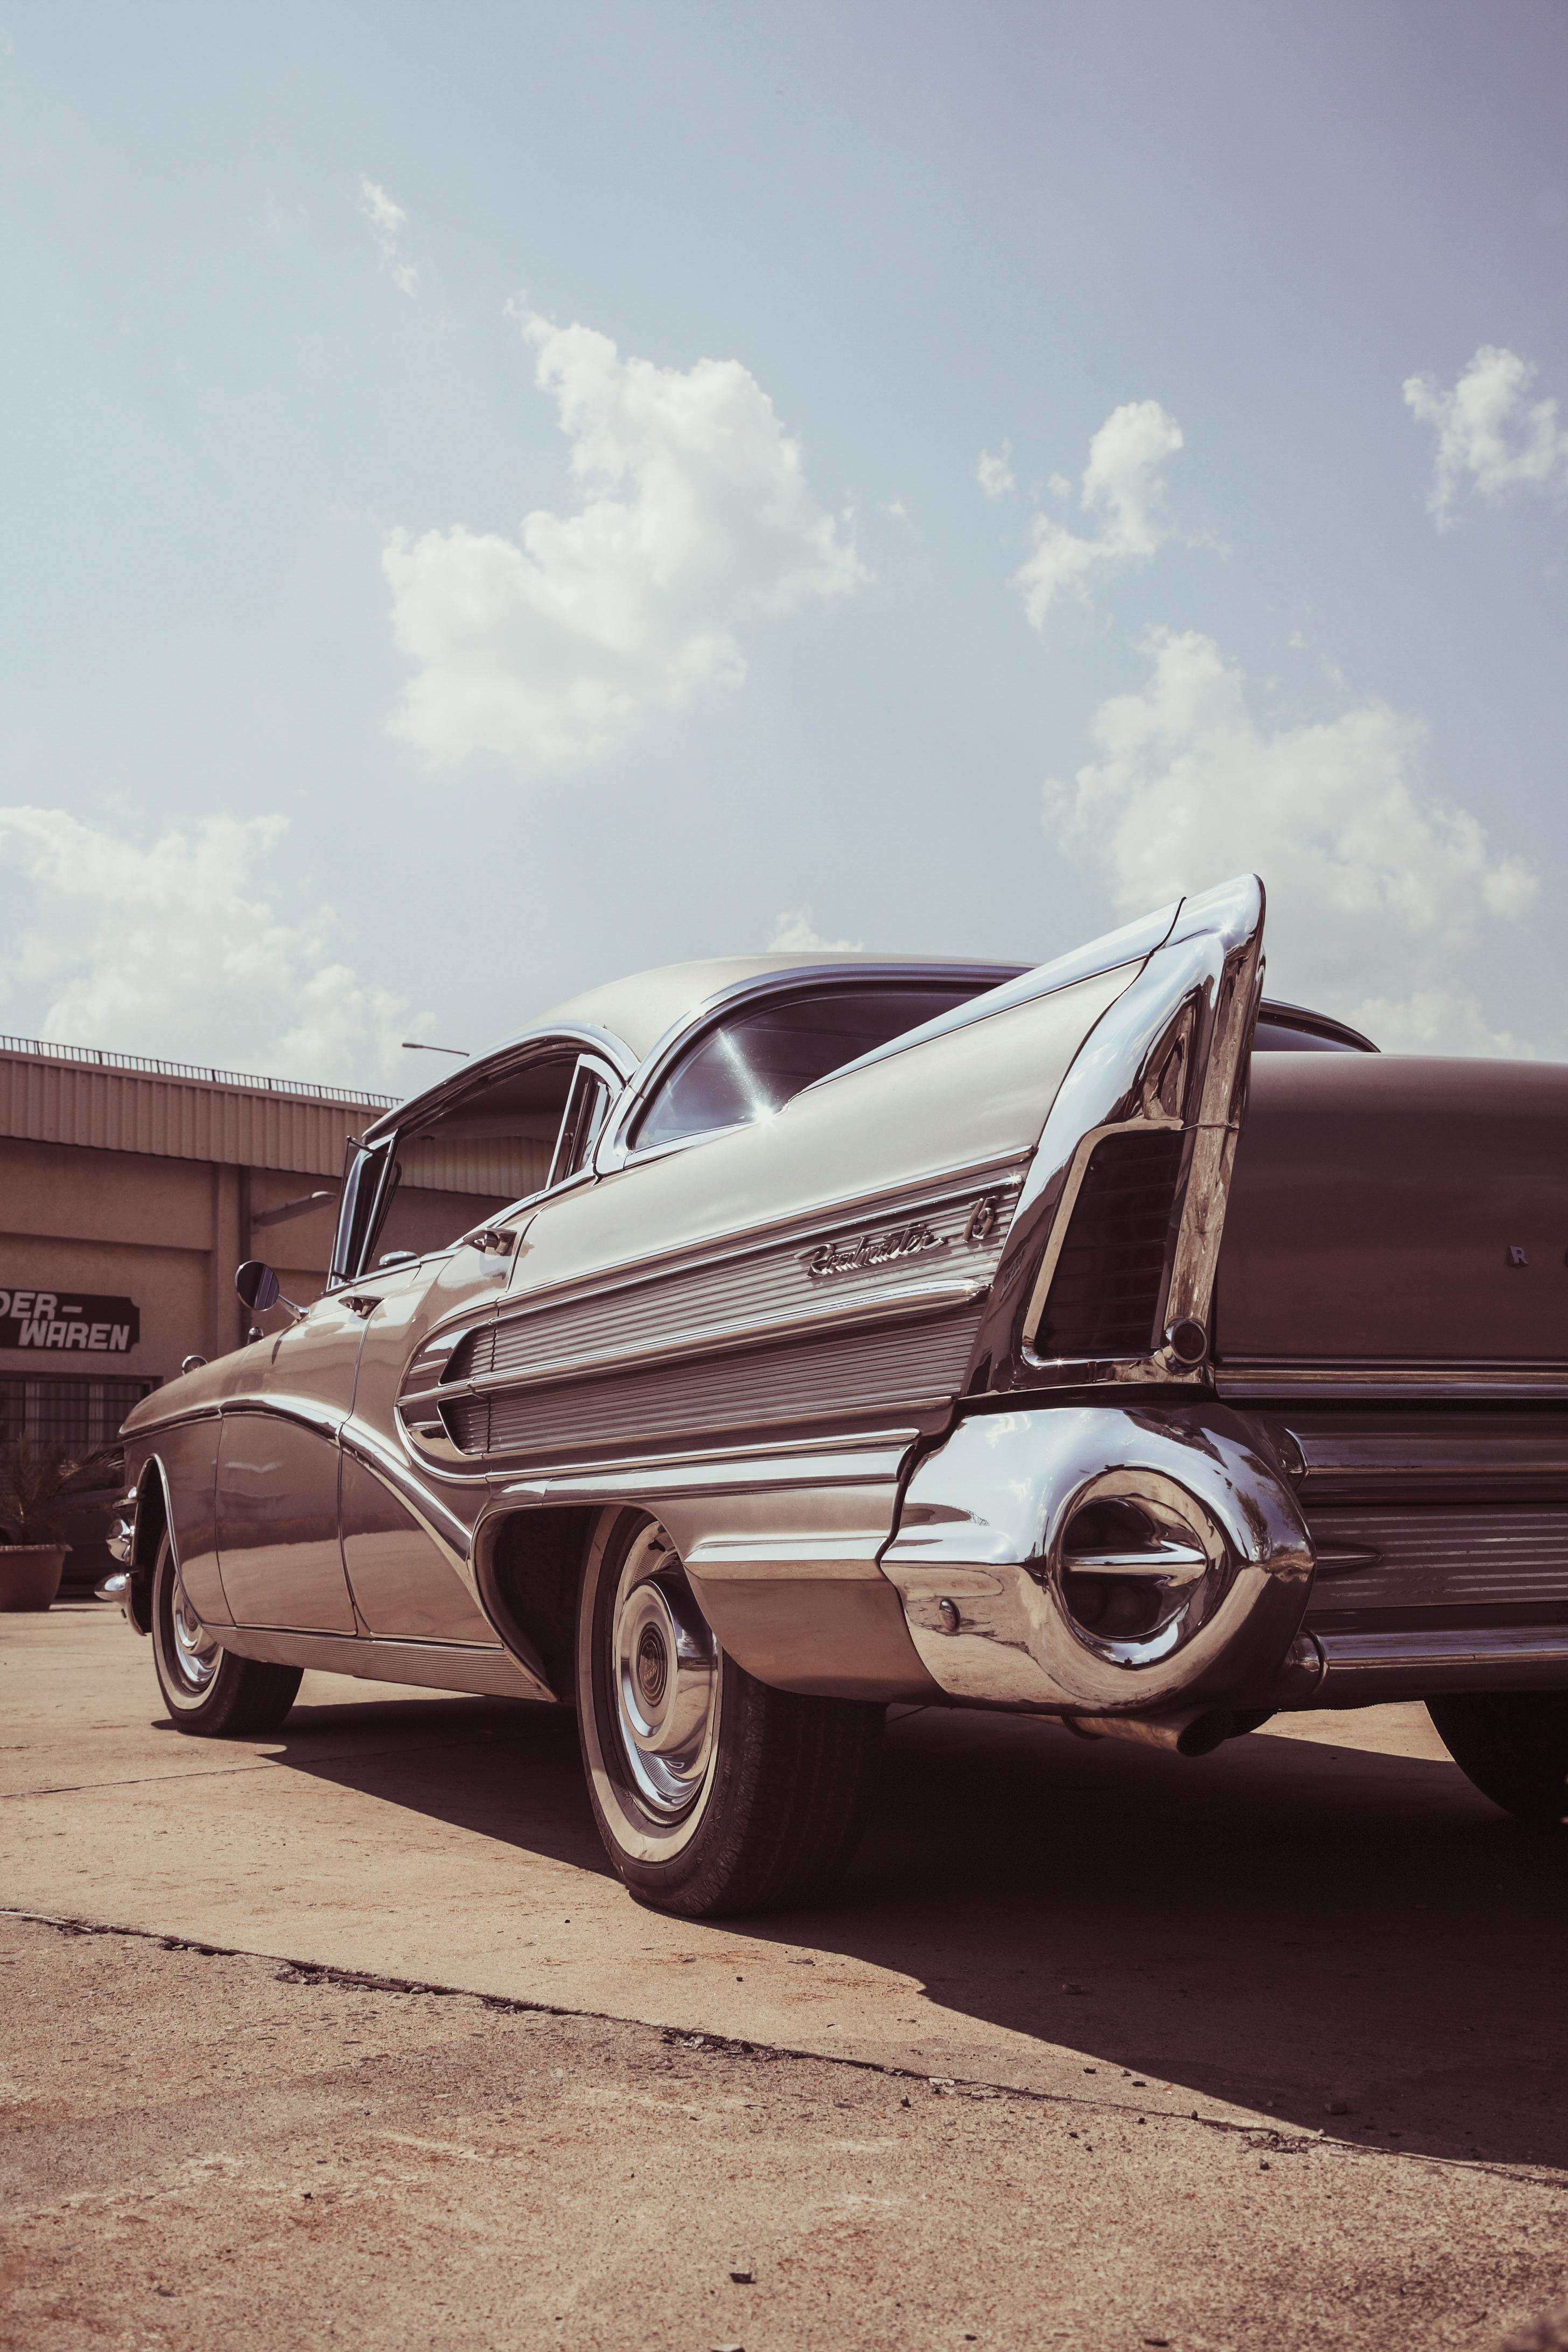 Old car classic vintage cars HD wallpaper  Peakpx